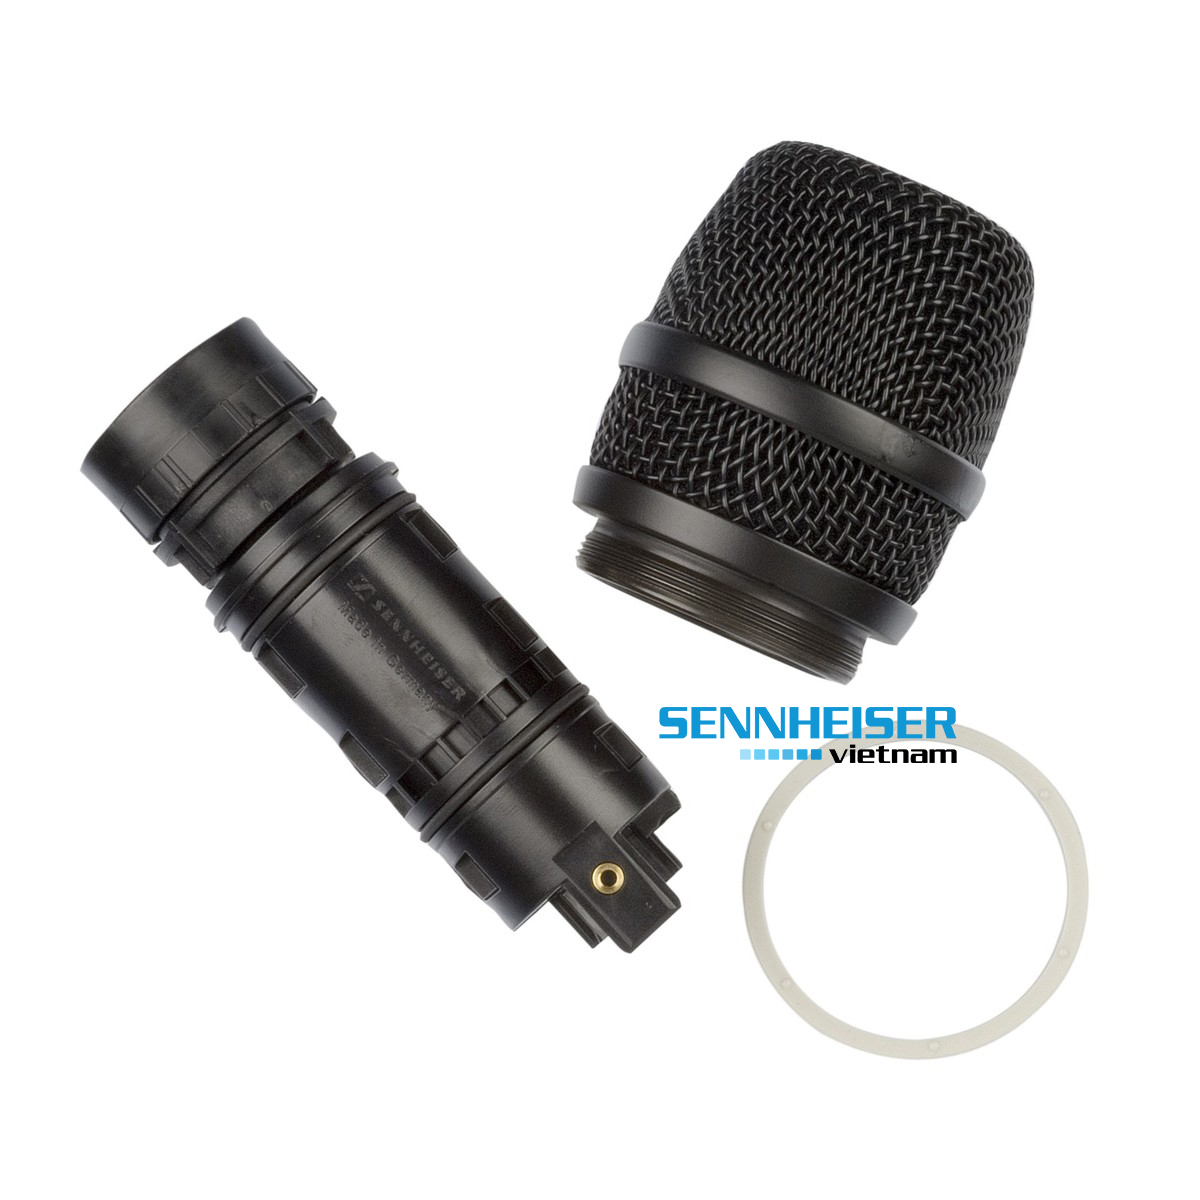 MMD 935-1 microphone head (only 935 variants)